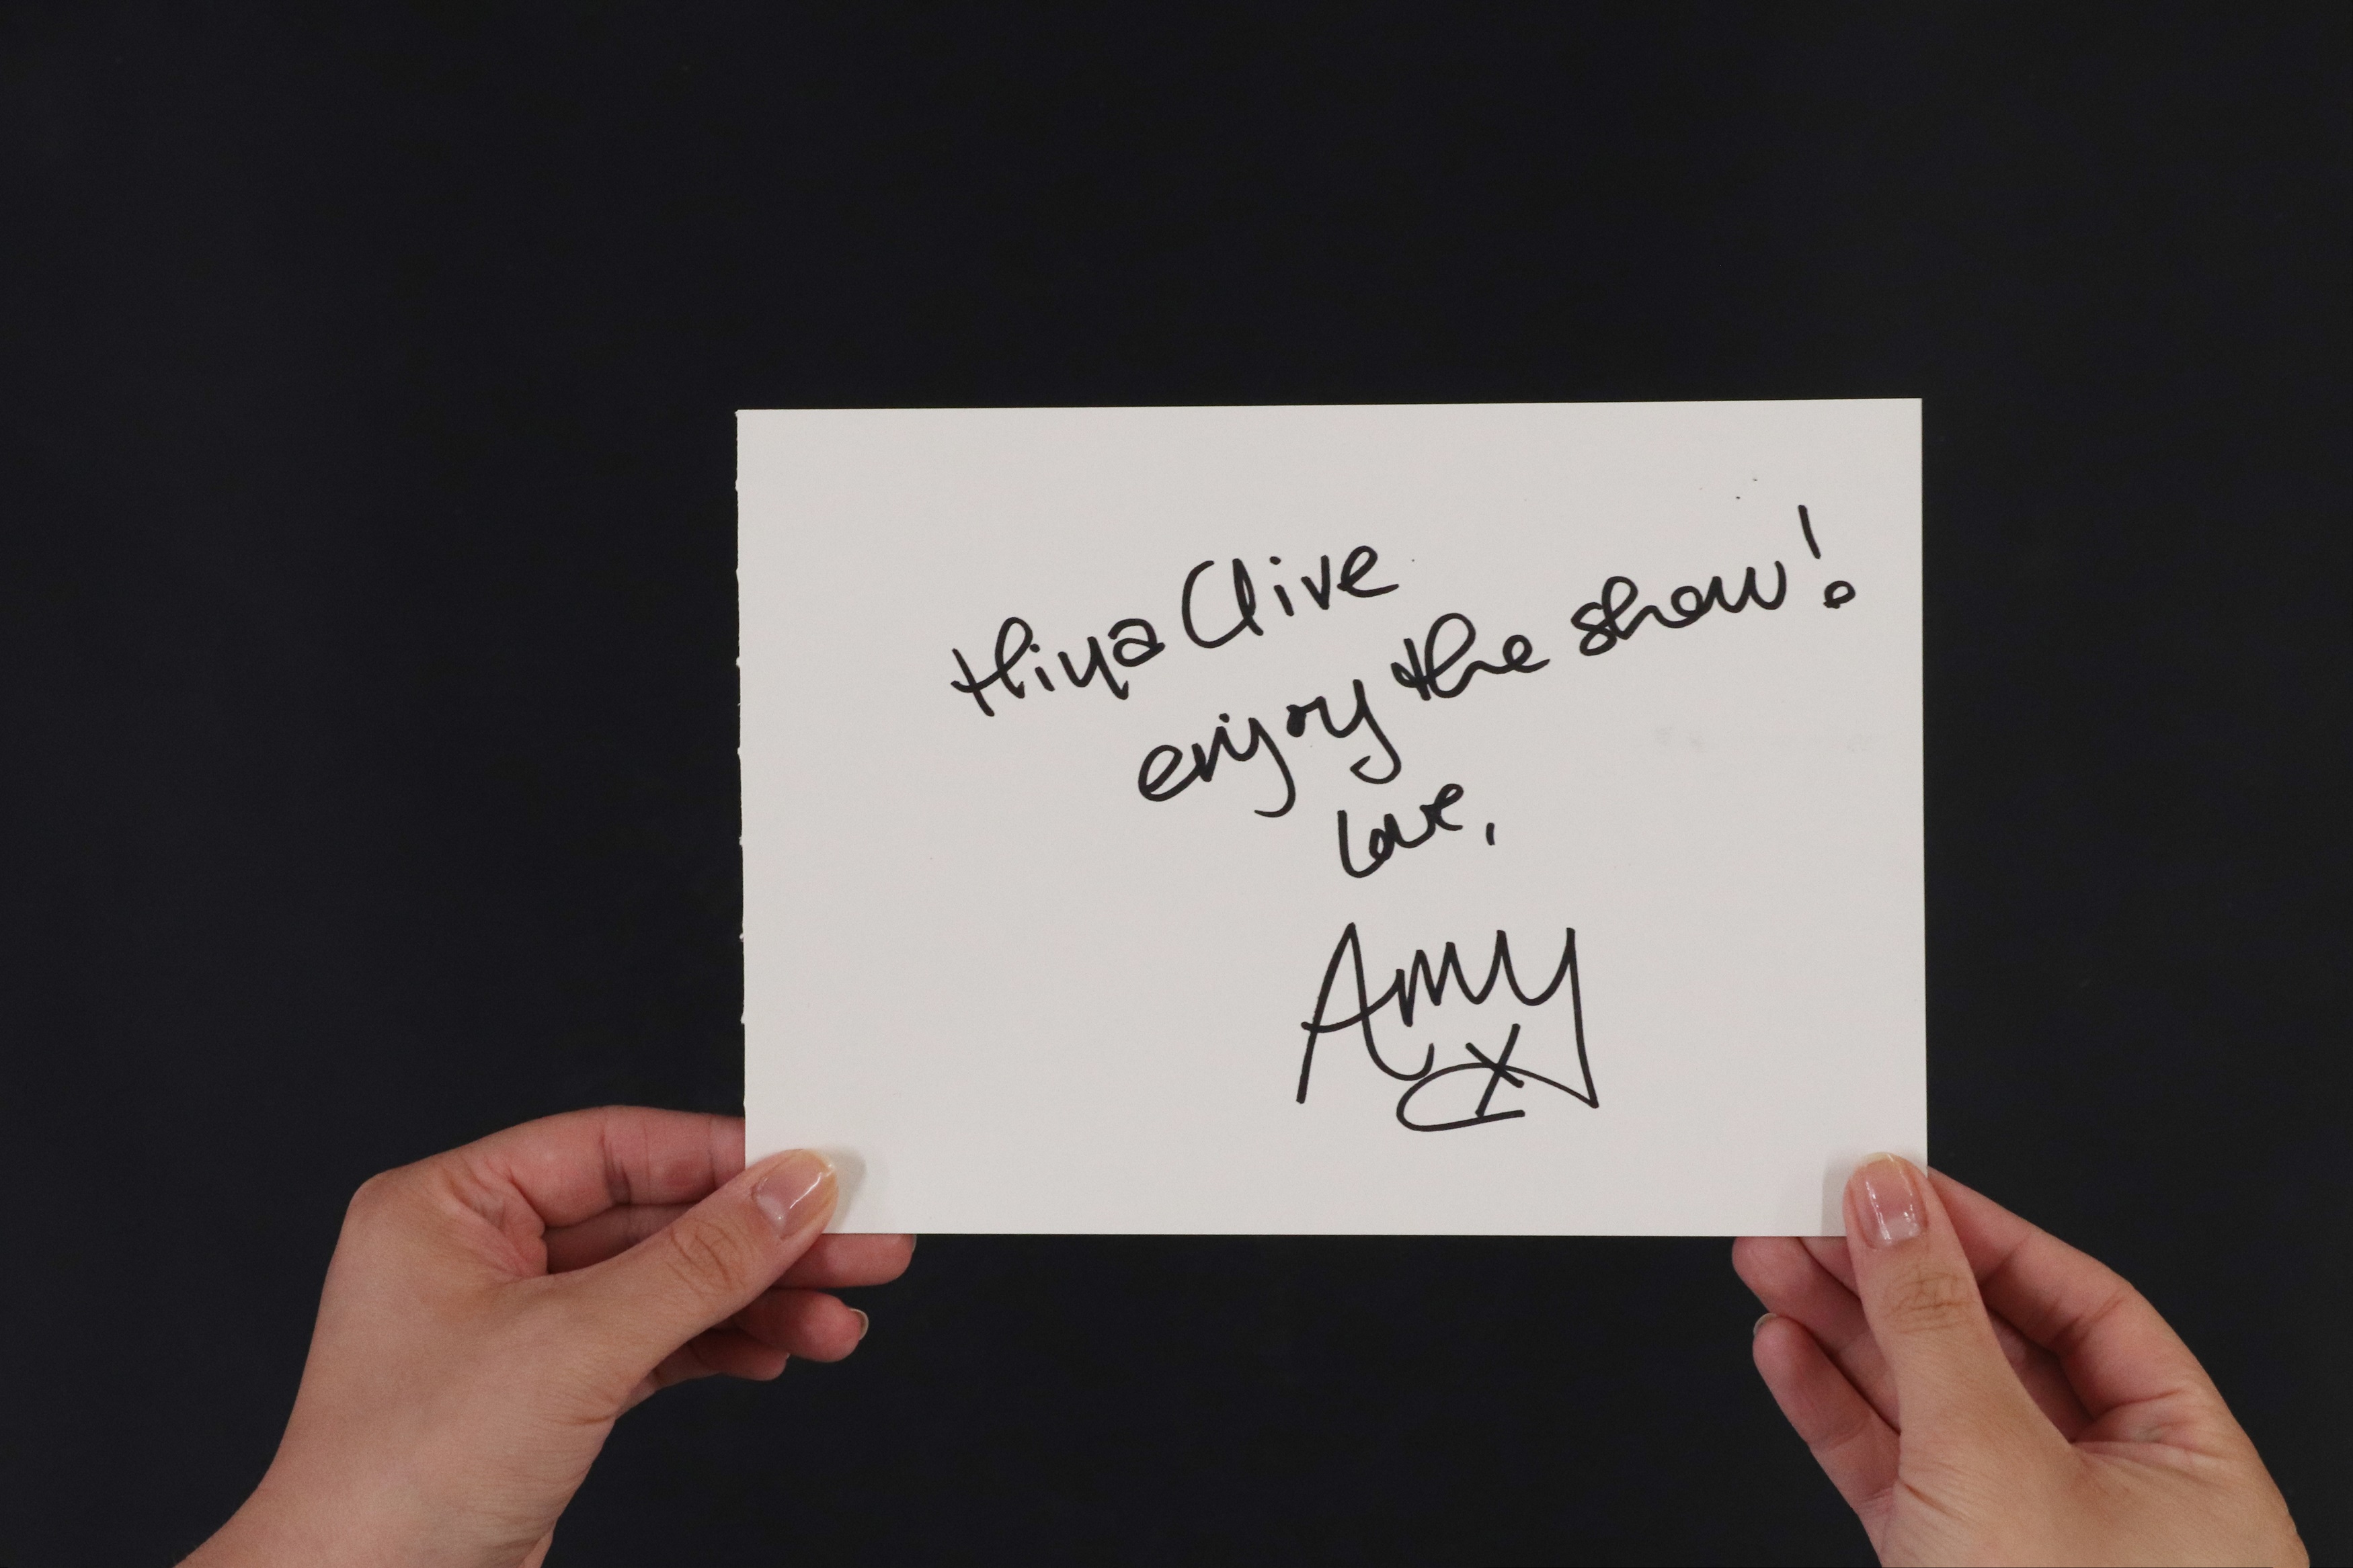 Amy Winehouse autograph, 'Hiya Clive enjoy the show! Love Amy x', on large white album page, 15 x 21cm (£500-800)